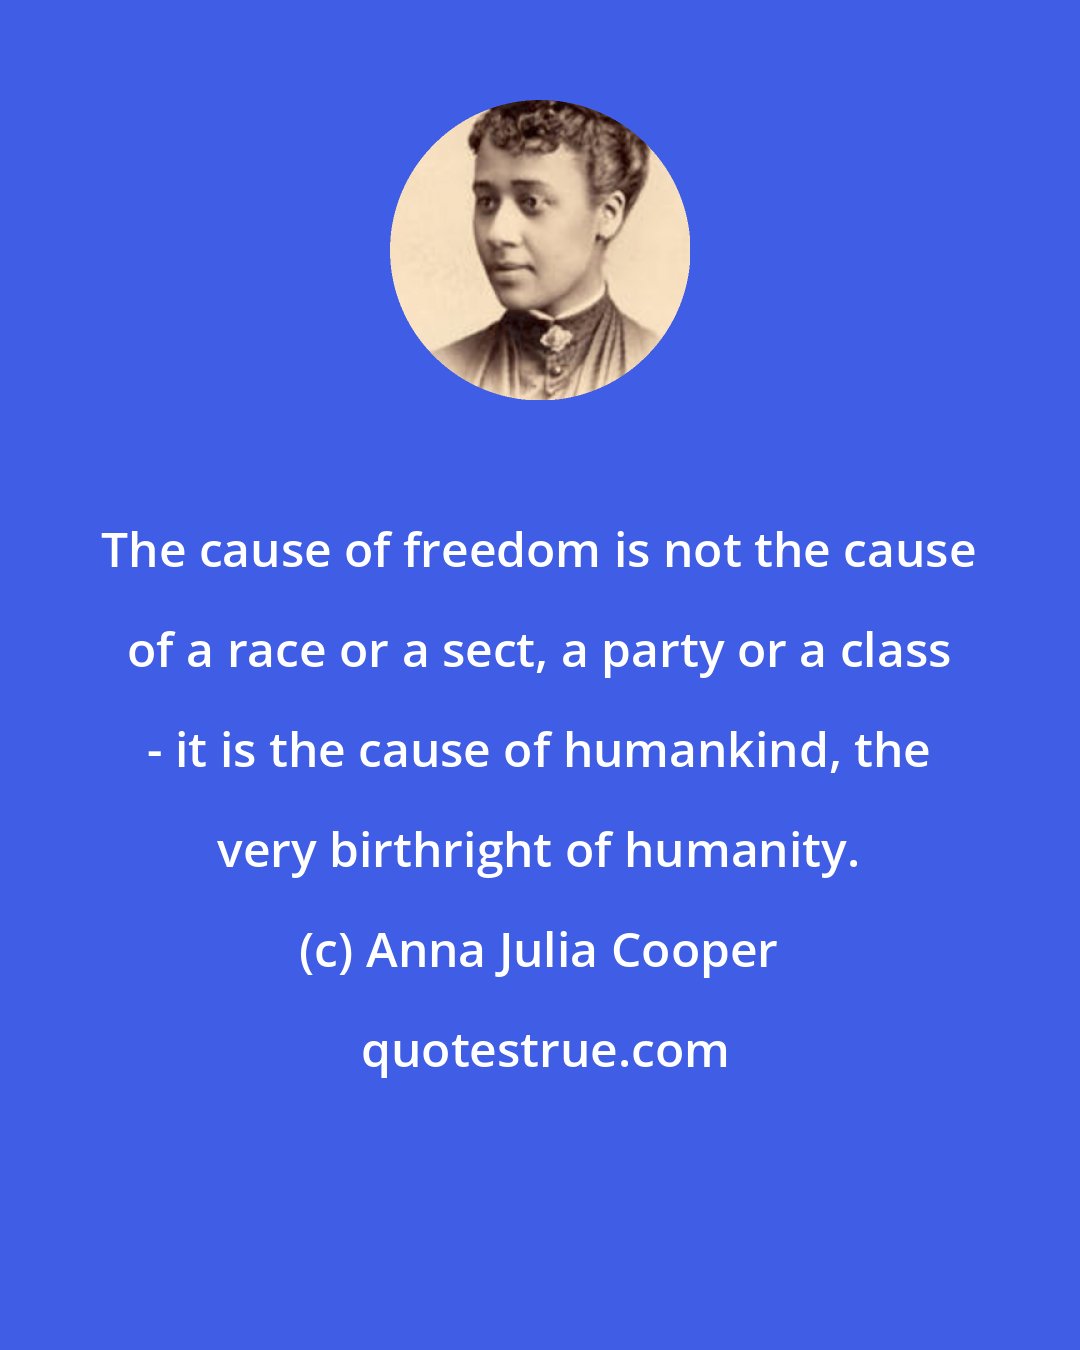 Anna Julia Cooper: The cause of freedom is not the cause of a race or a sect, a party or a class - it is the cause of humankind, the very birthright of humanity.